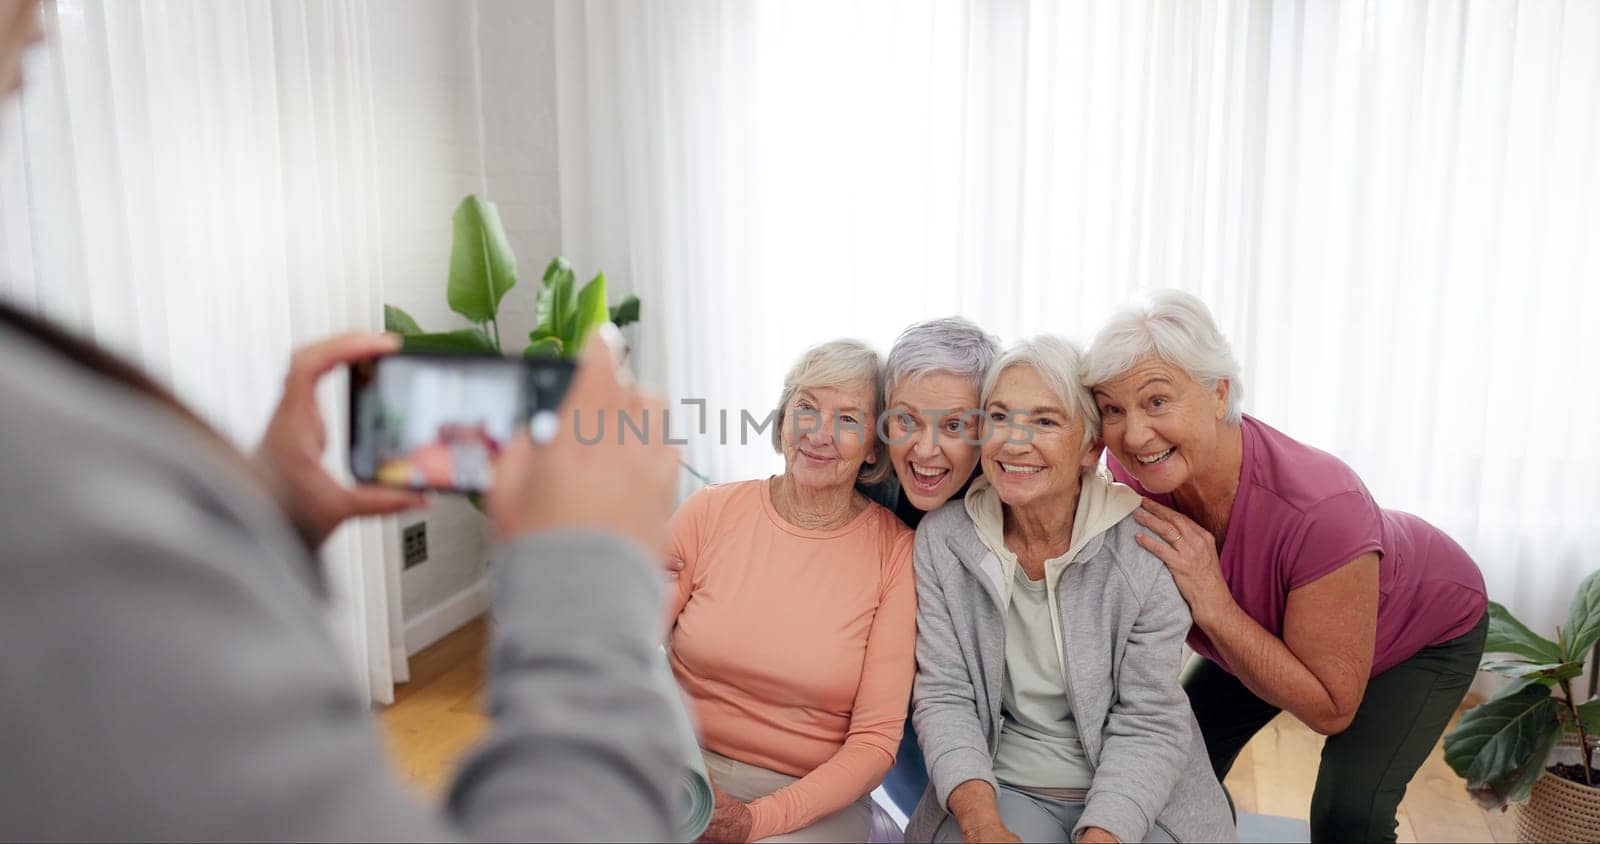 Senior fitness, women and person with a photo for a yoga, exercise or workout memory together. Smile, group and coach taking picture of elderly friends at a training studio for a class in retirement.